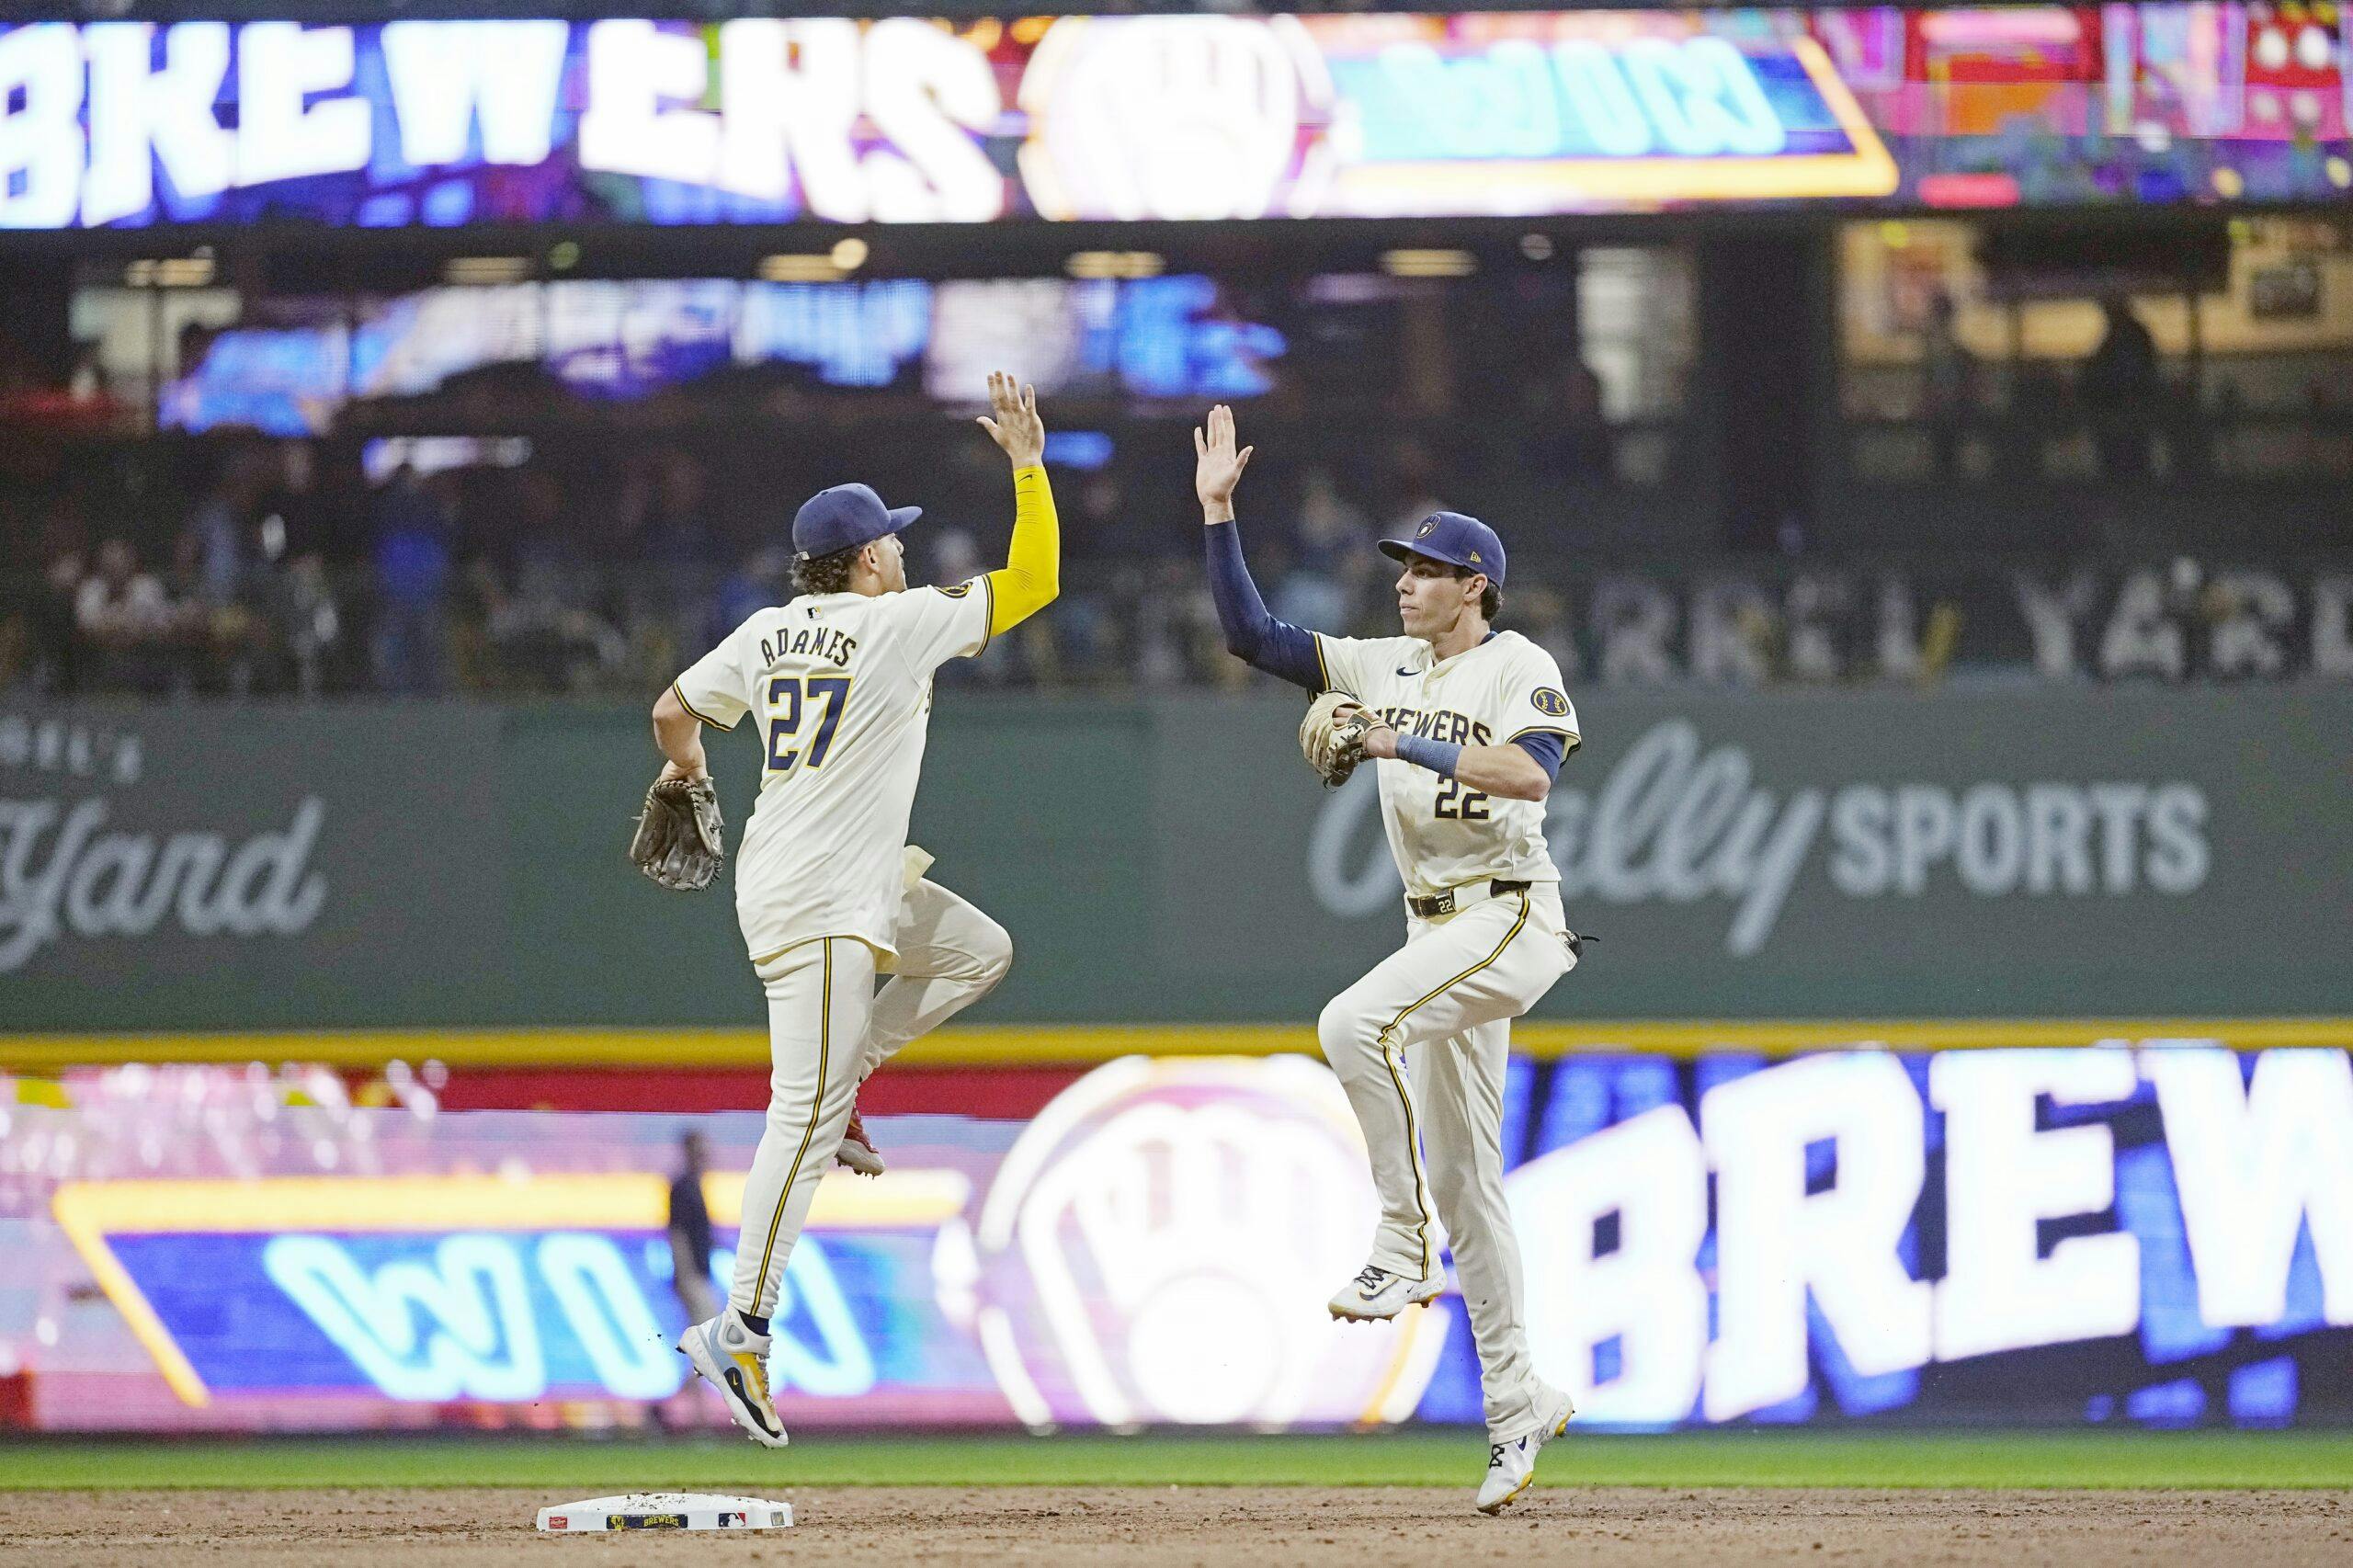 Milwaukee Brewers shortstop Willy Adames (27) and left fielder Christian Yelich (22) celebrate following the game against the Toronto Blue Jays at American Family Field.